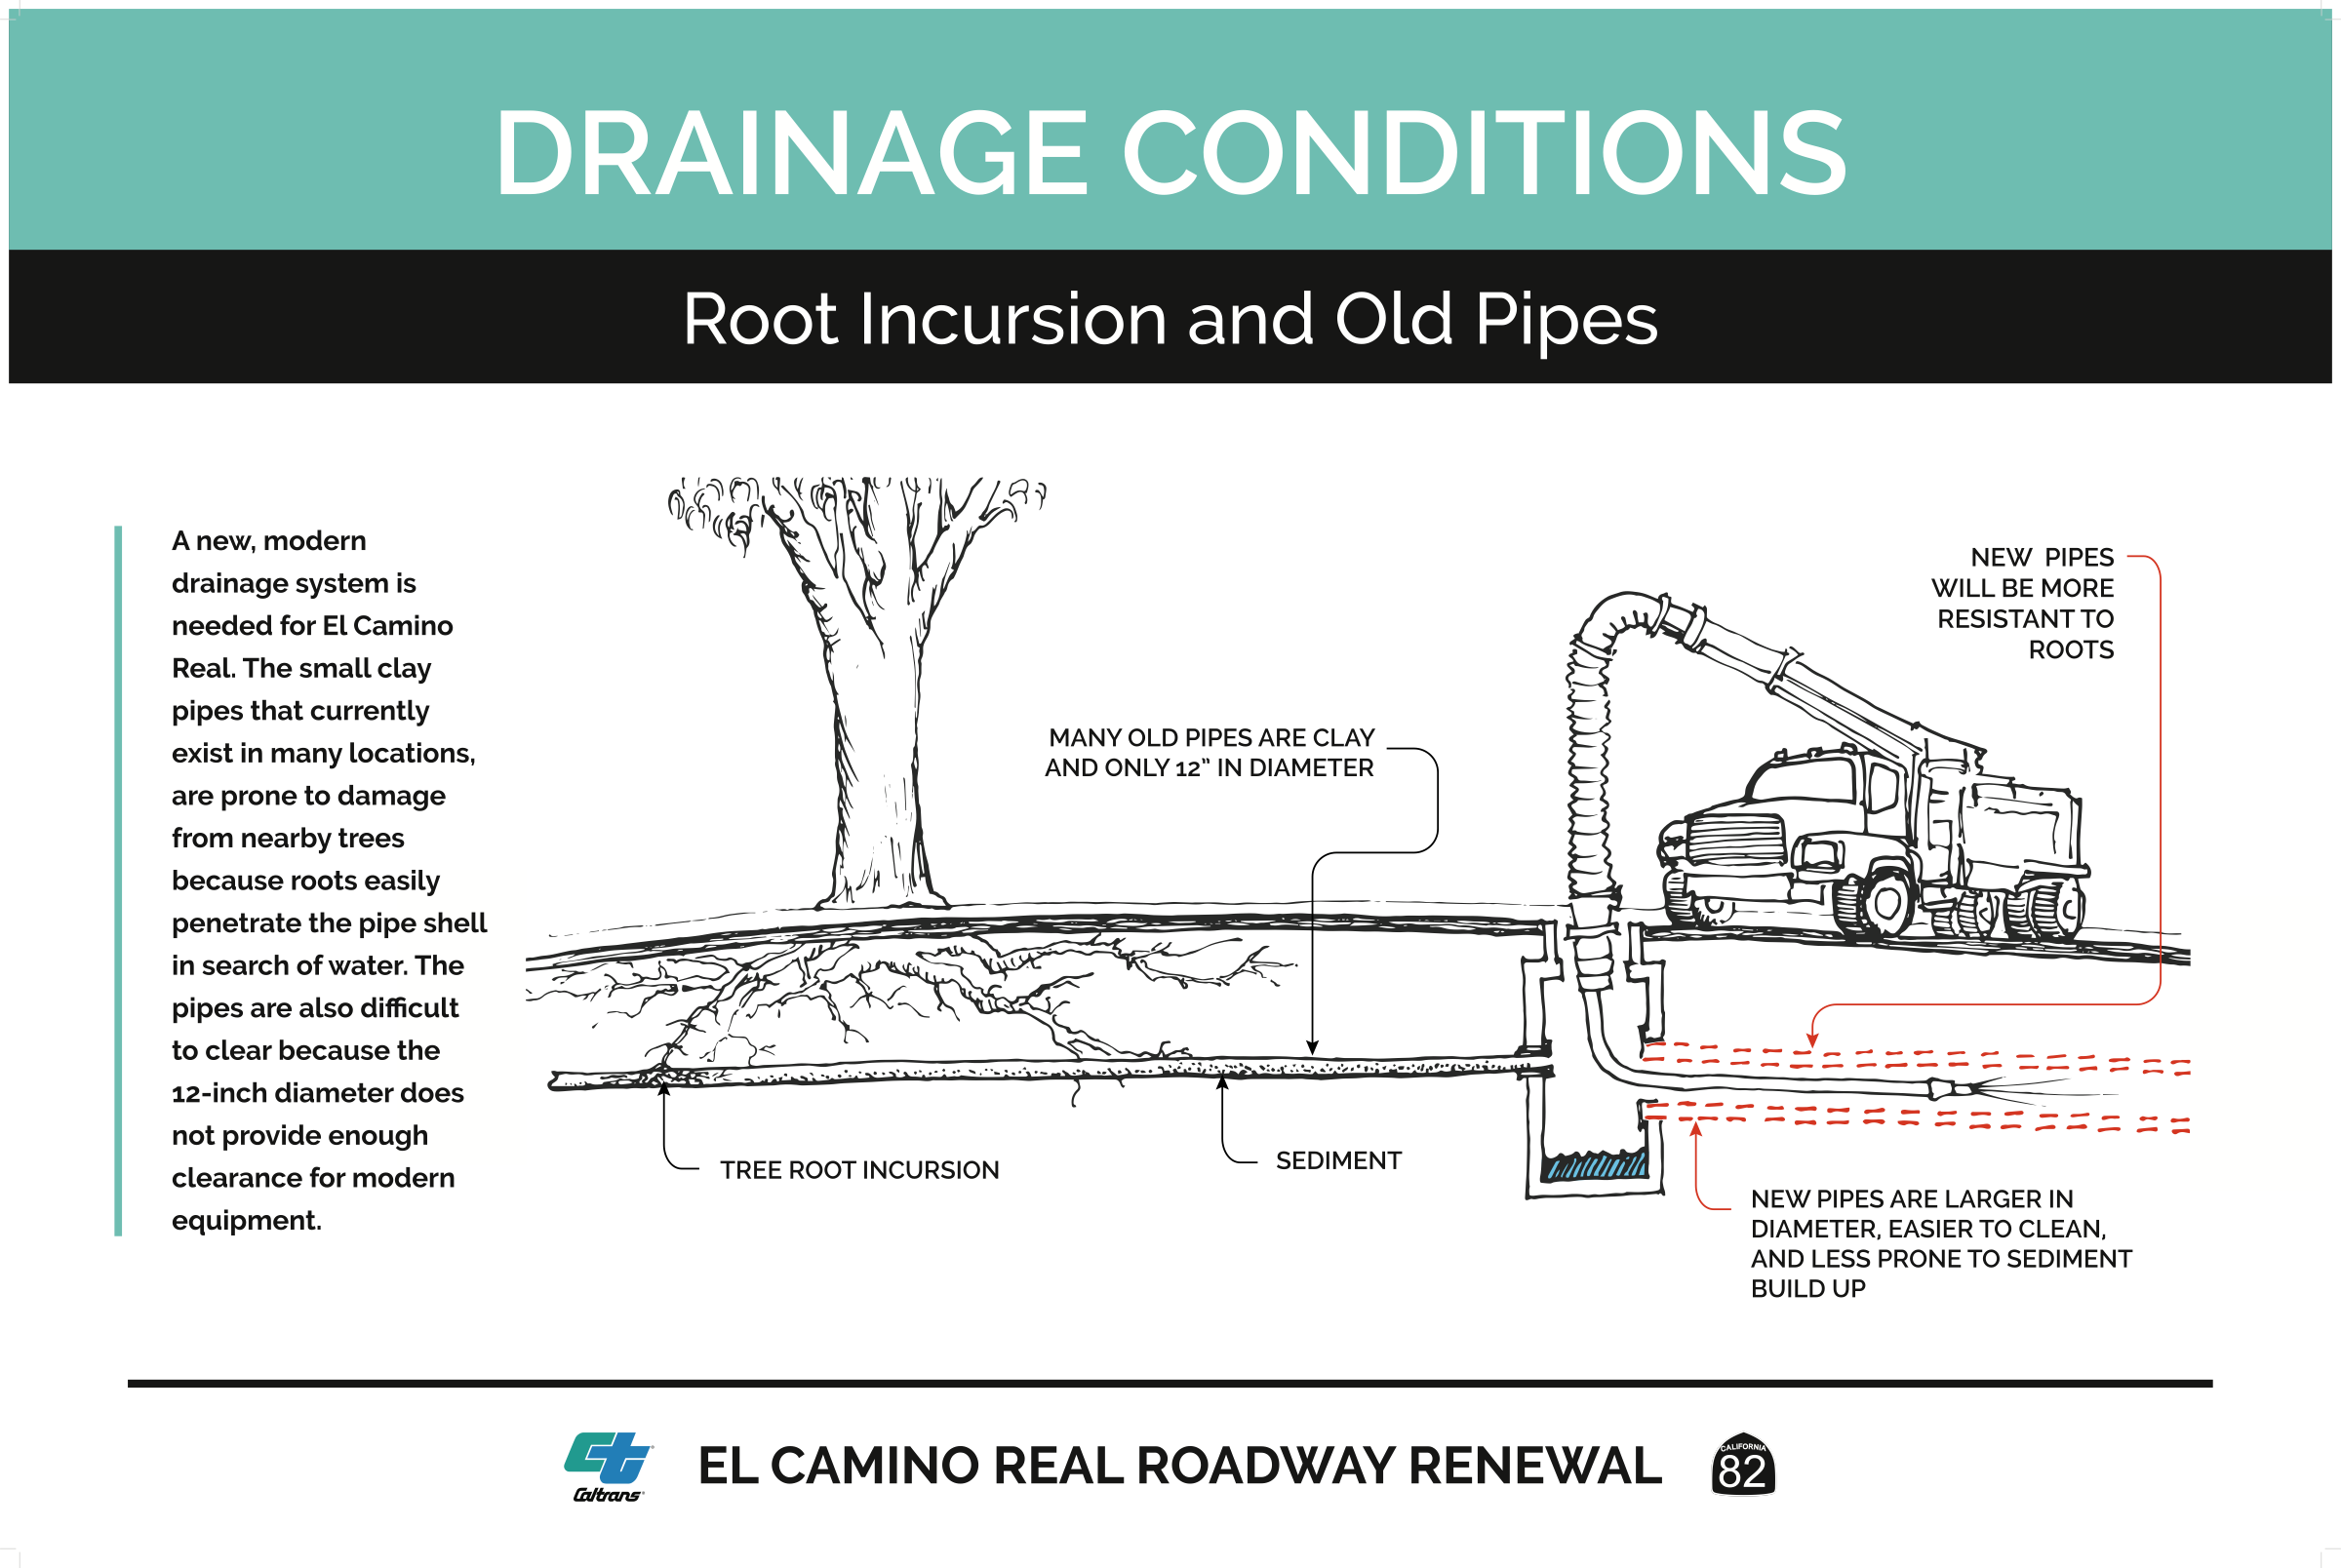 drainage conditions - root incursion and old pipes